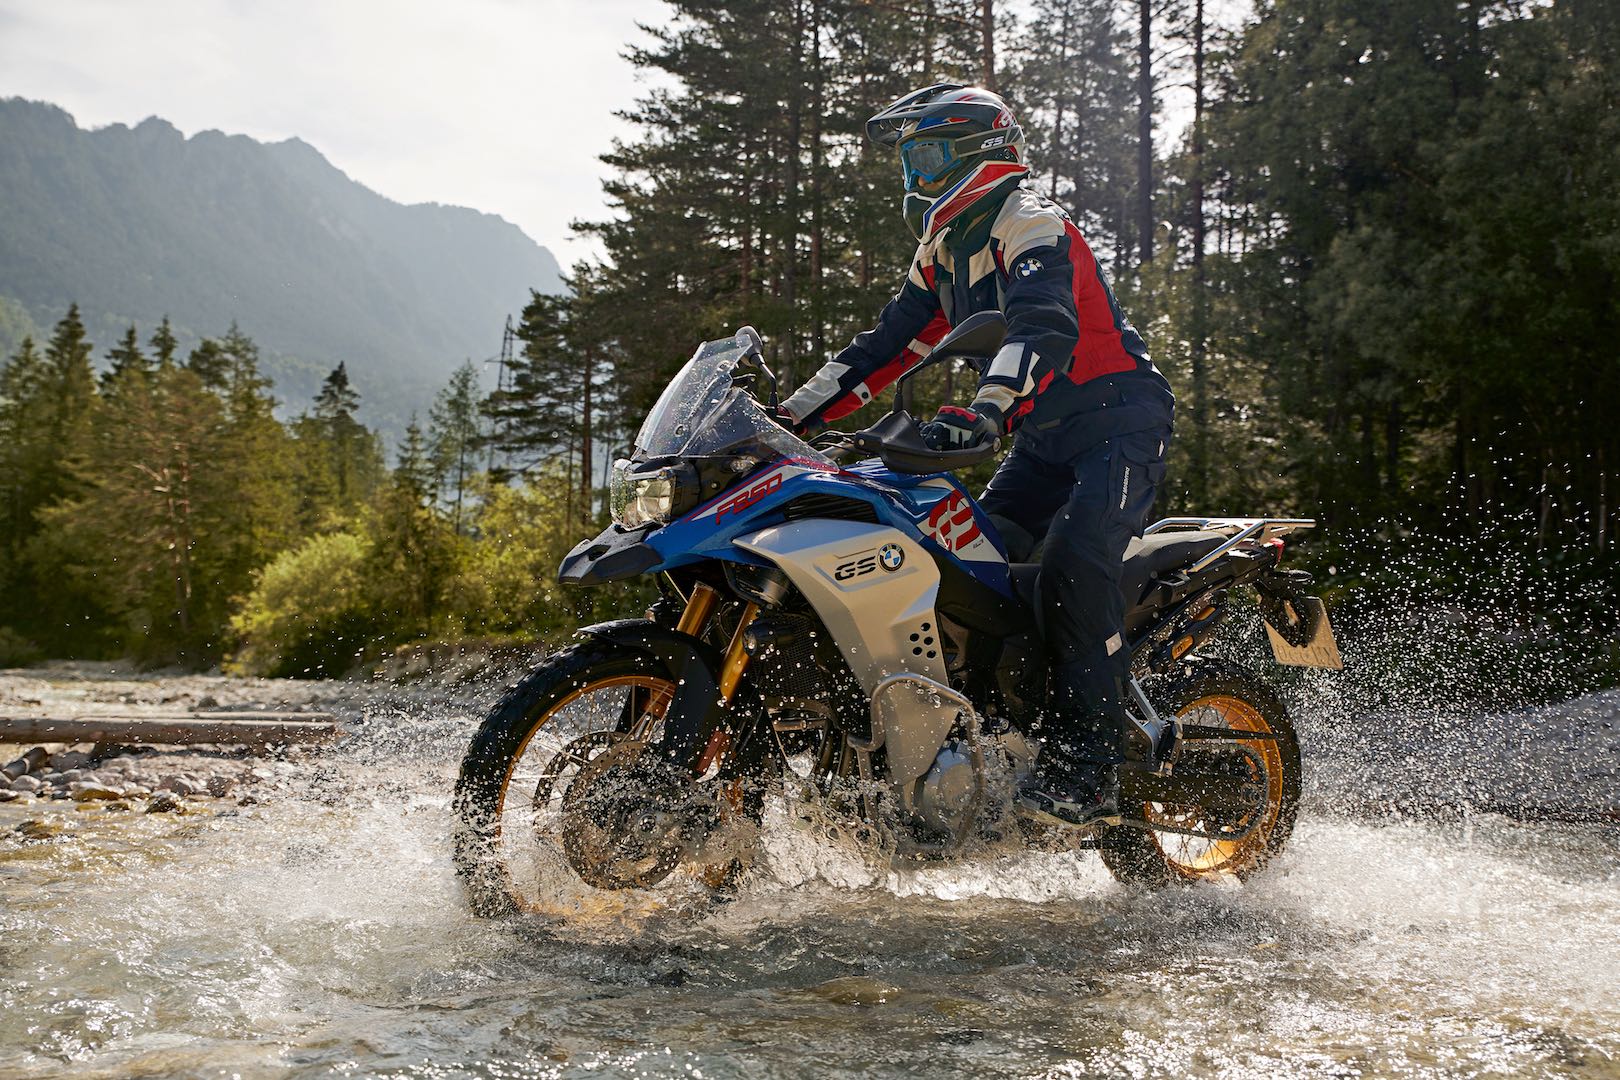 What is the best BMW motorcycle for adventure?